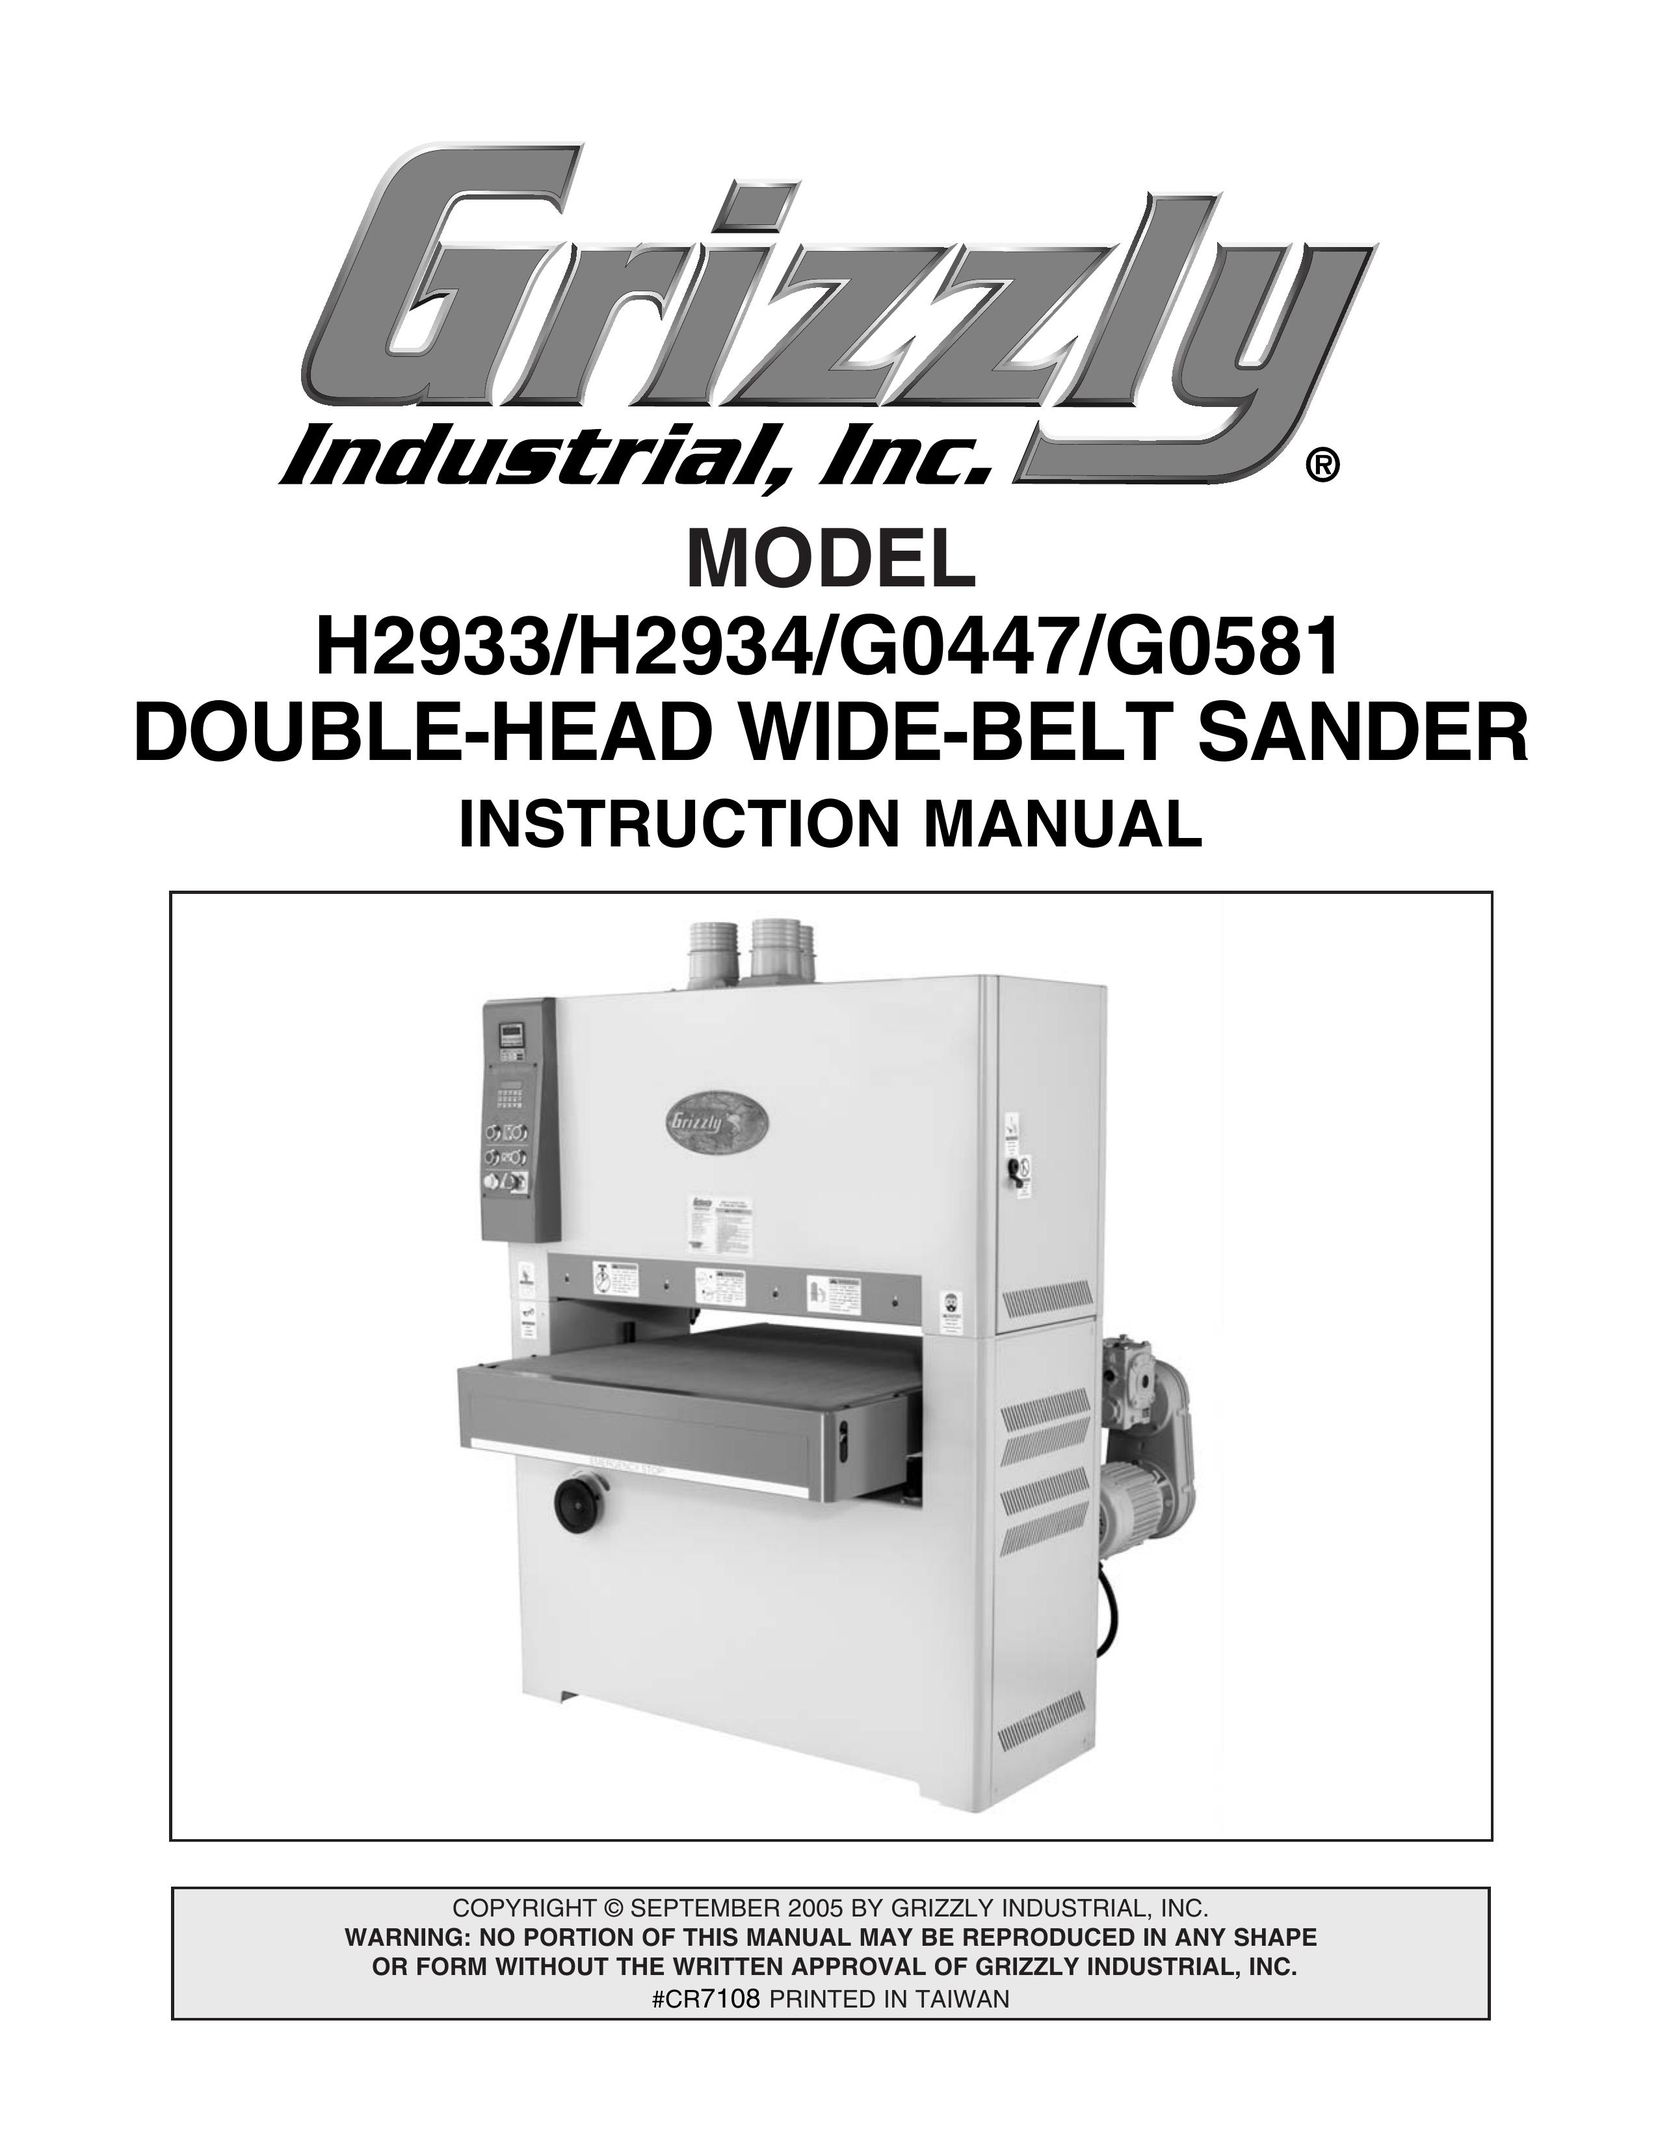 Grizzly G0581 Sander User Manual